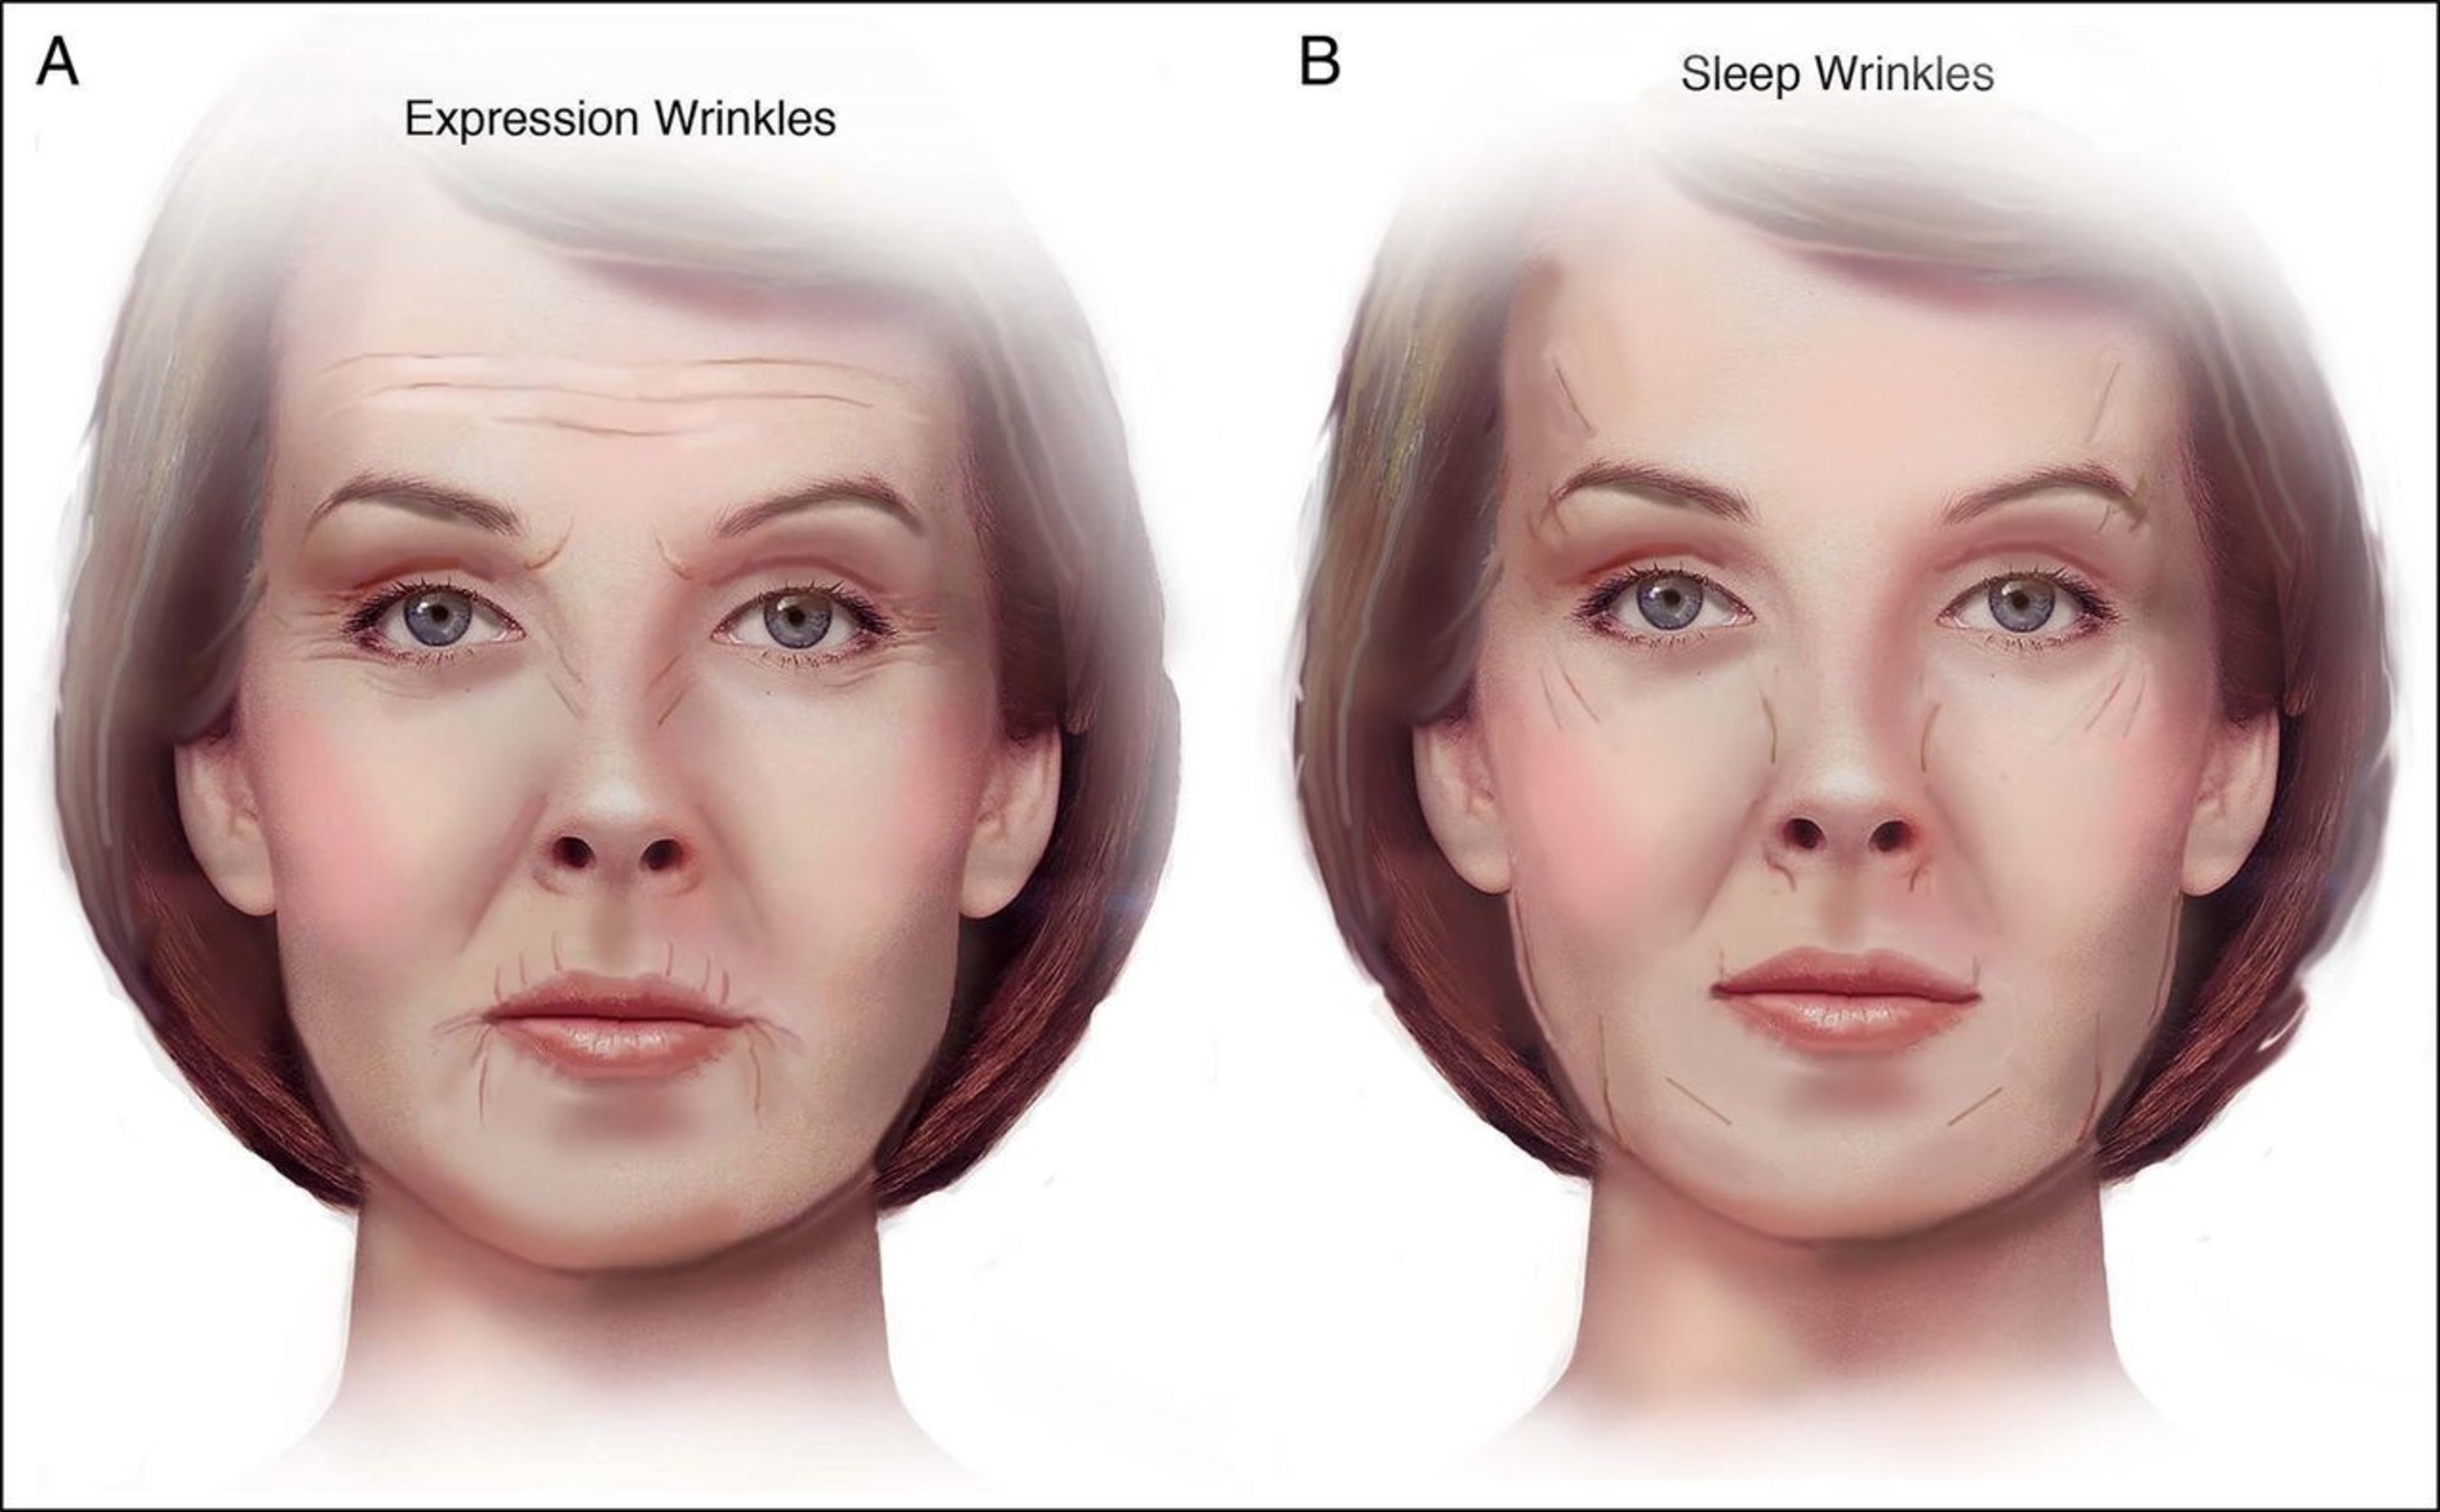 (A) Common expression wrinkles. (B) Common sleep wrinkles.